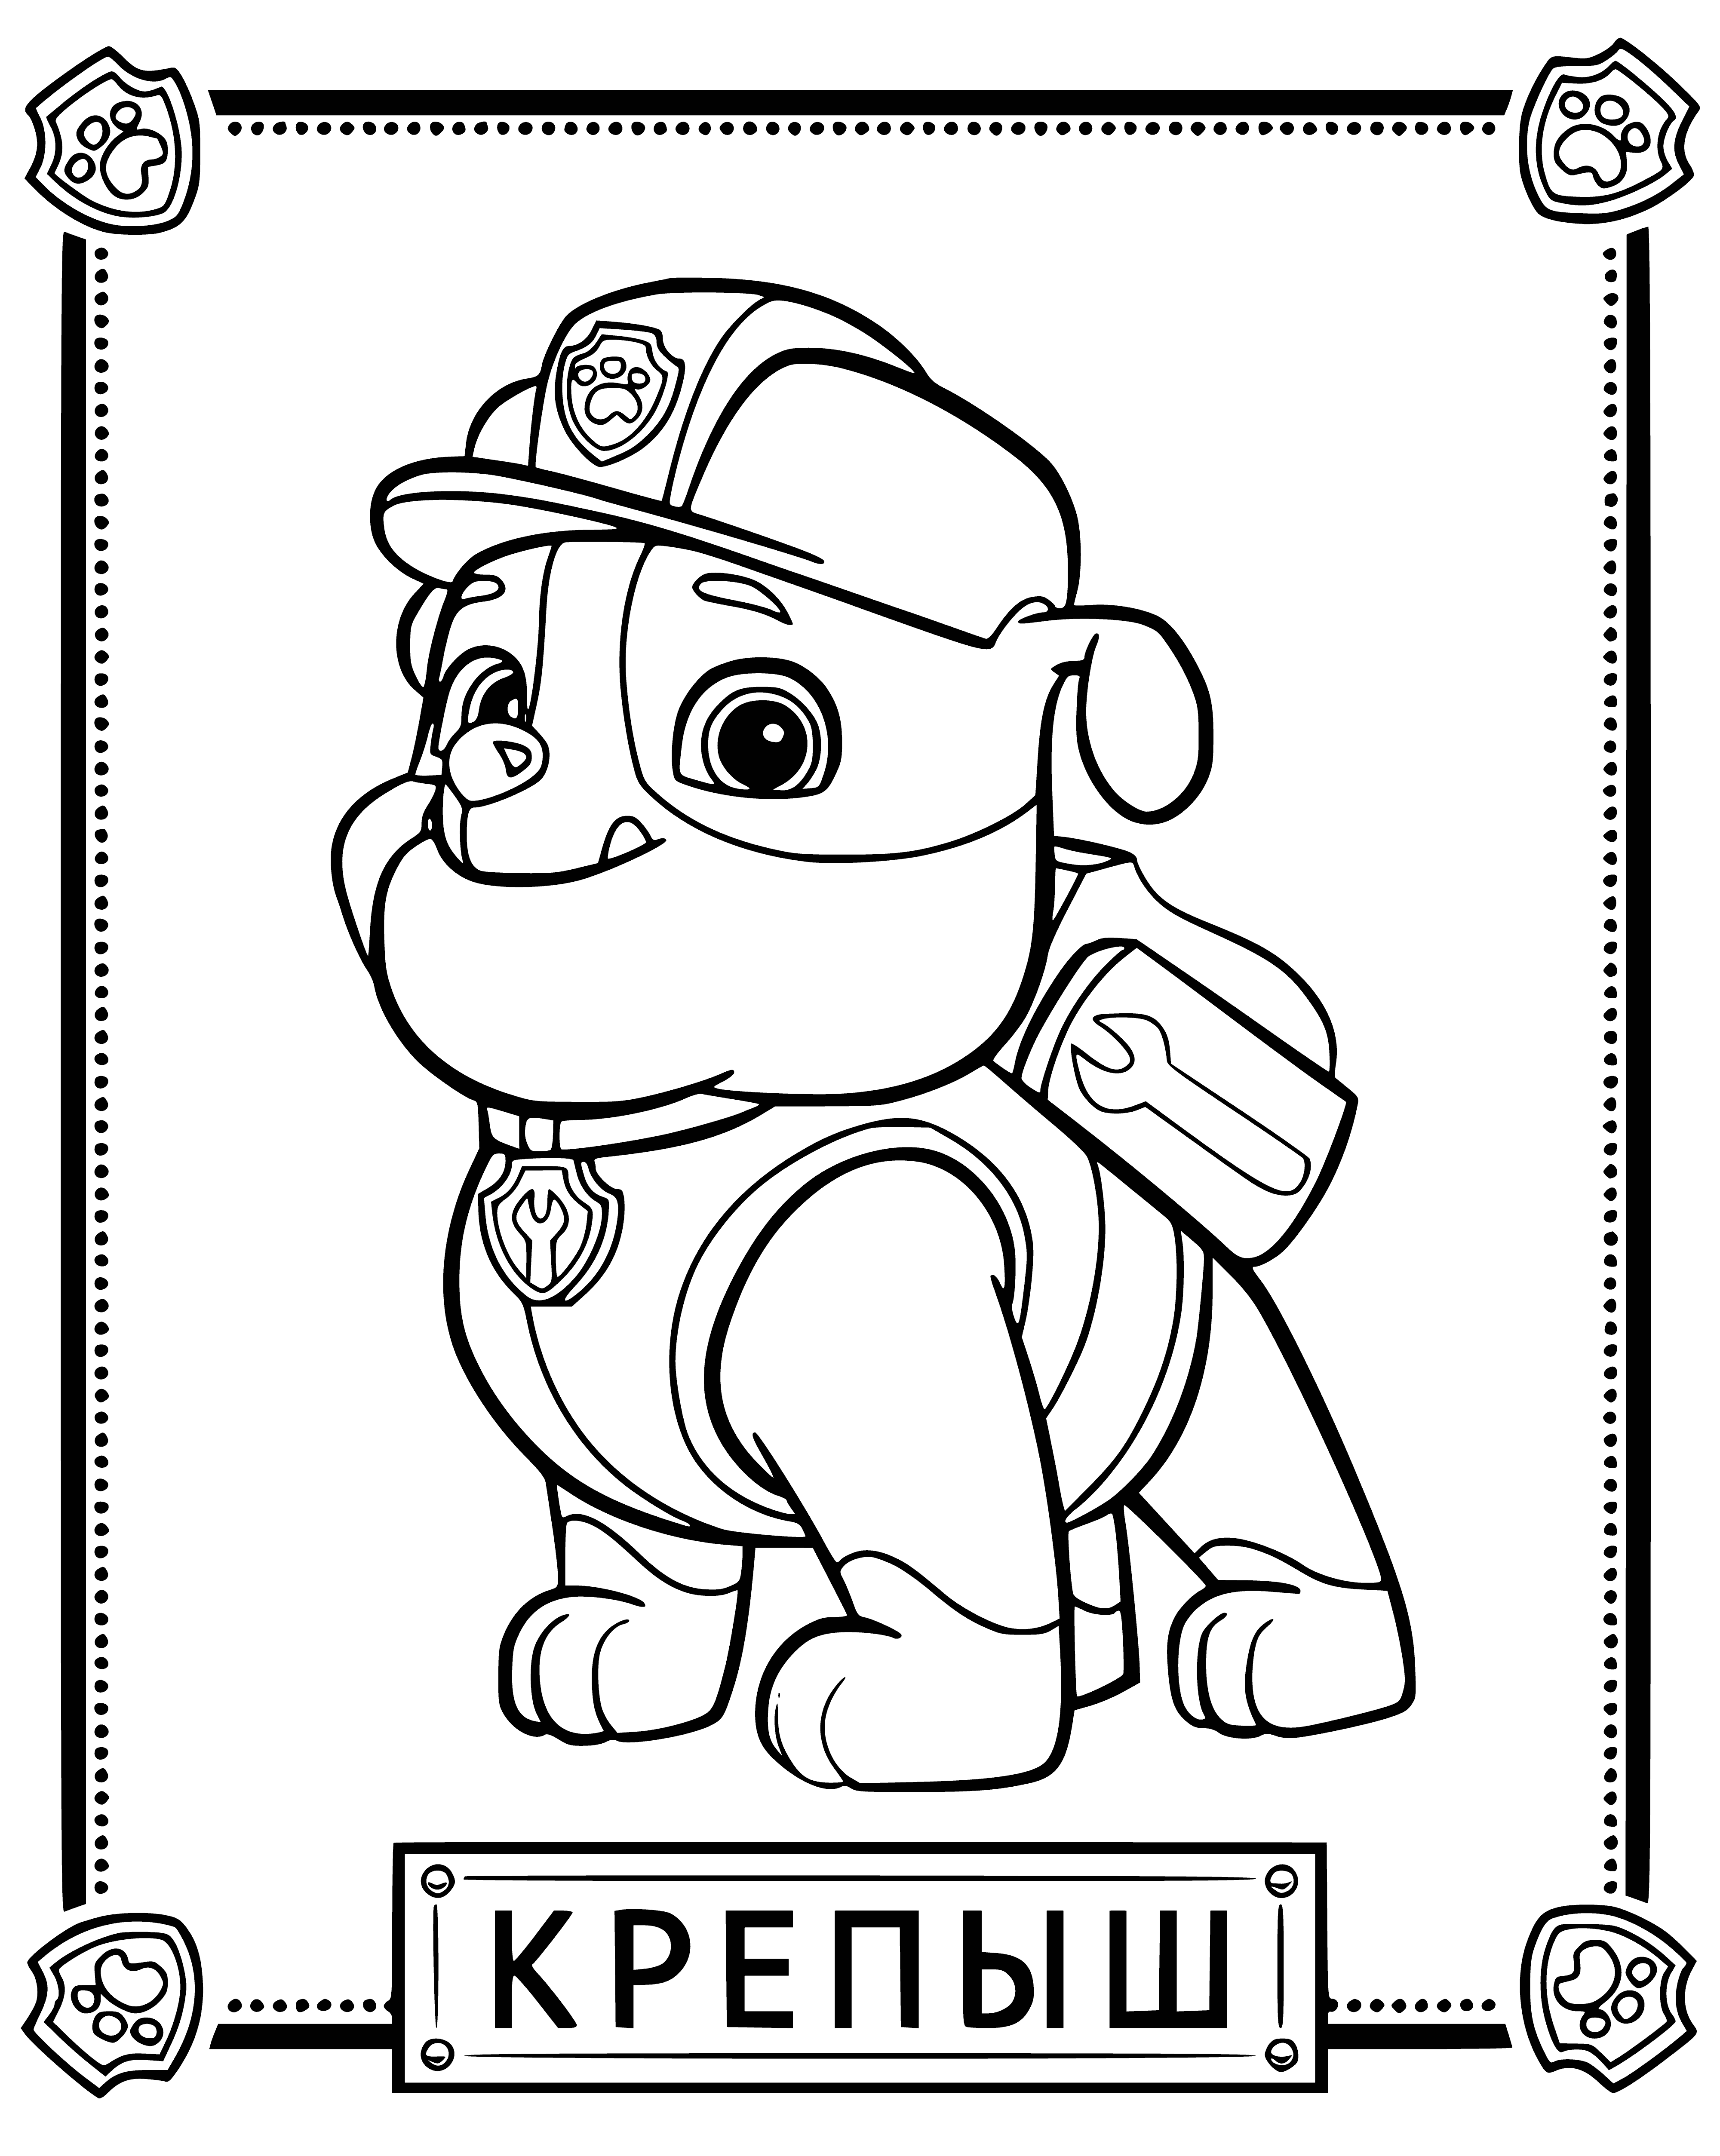 coloring page: Kids can color a PAW Patrol fortress page with its lookout tower, stairs, bridge, slide, and logo. #pawpatrol #coloring #fun